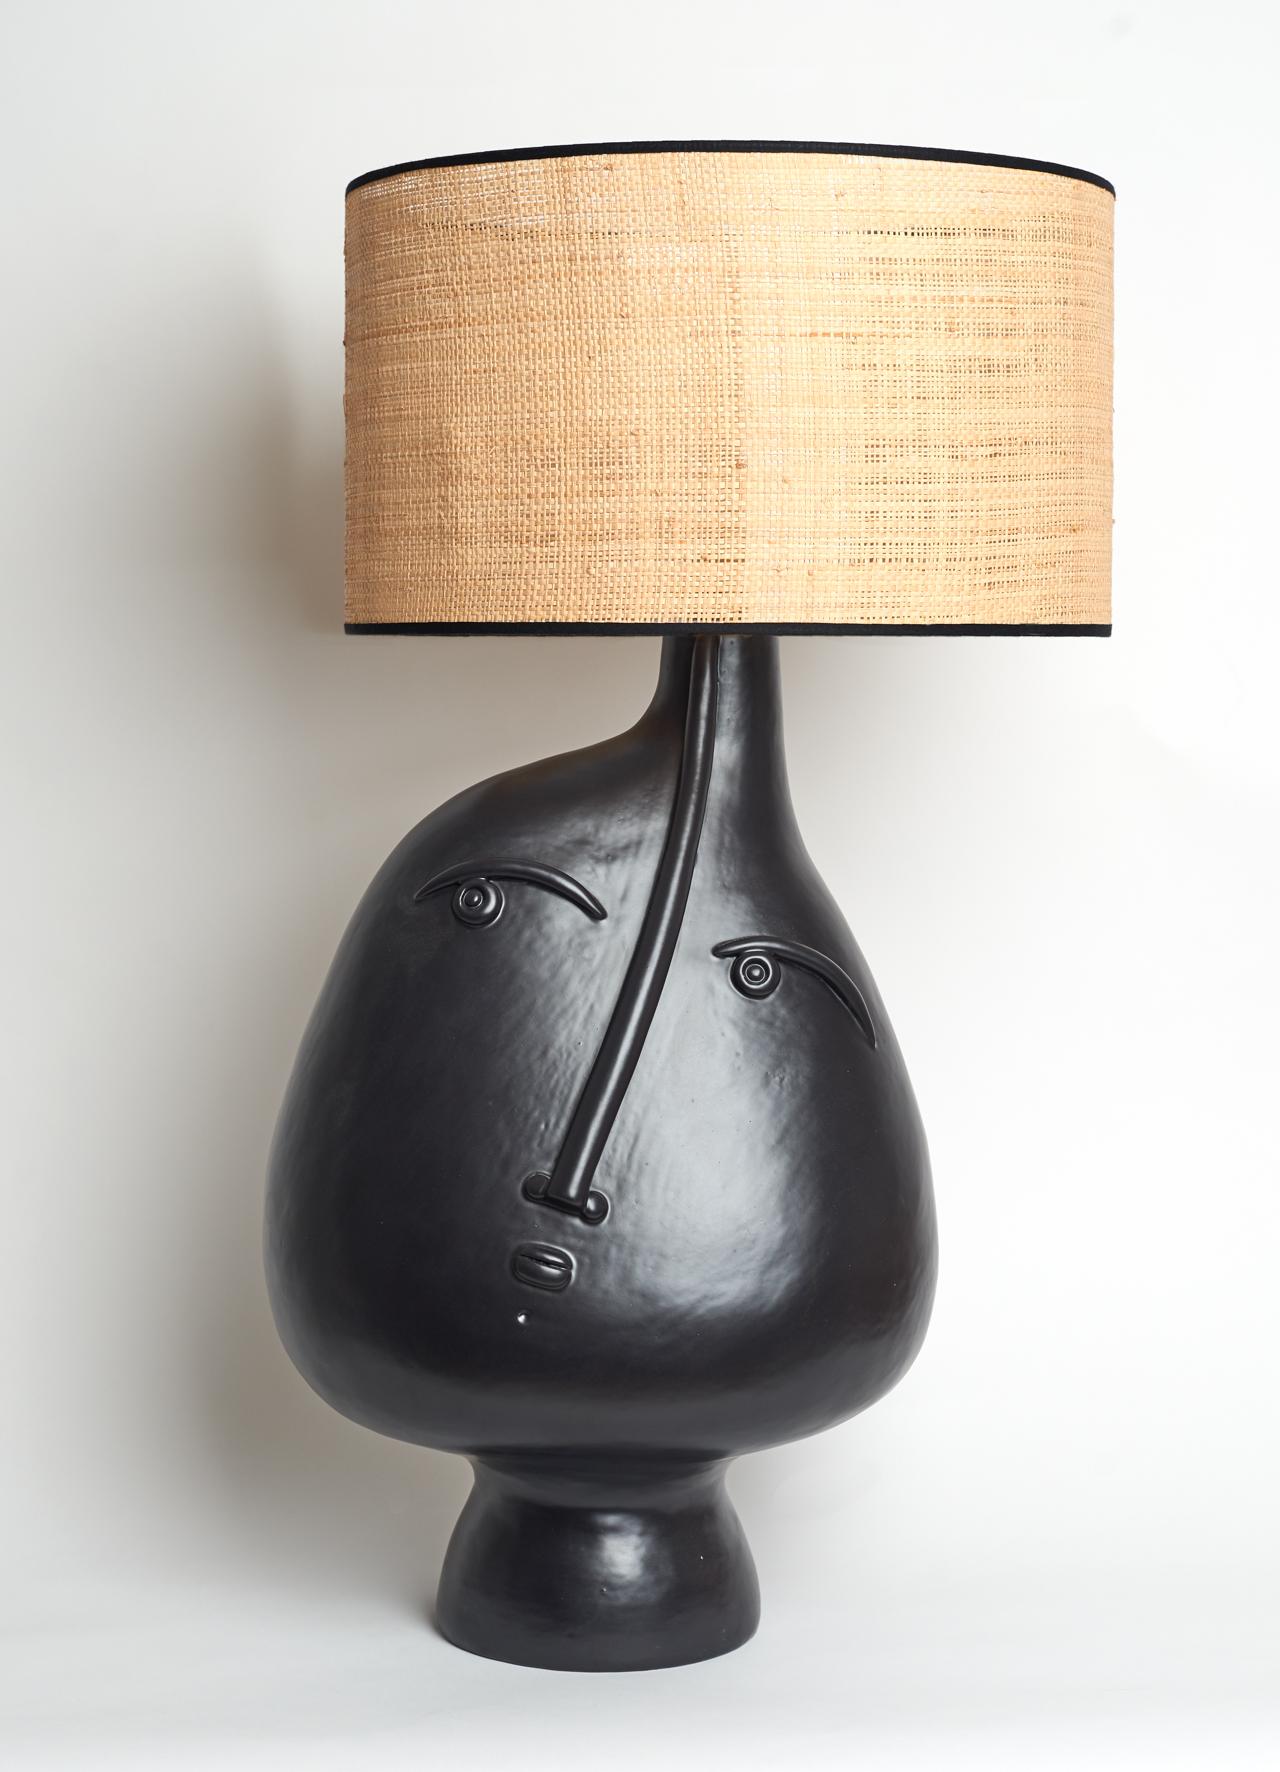 Hand-sculpted ceramic lamp base 

One of a kind stoneware piece glazed in black enamel signed by the French ceramicists Dalo 

The height dimension is for the ceramic sculpture solely 

Note to international purchasers:
This lamp-base has